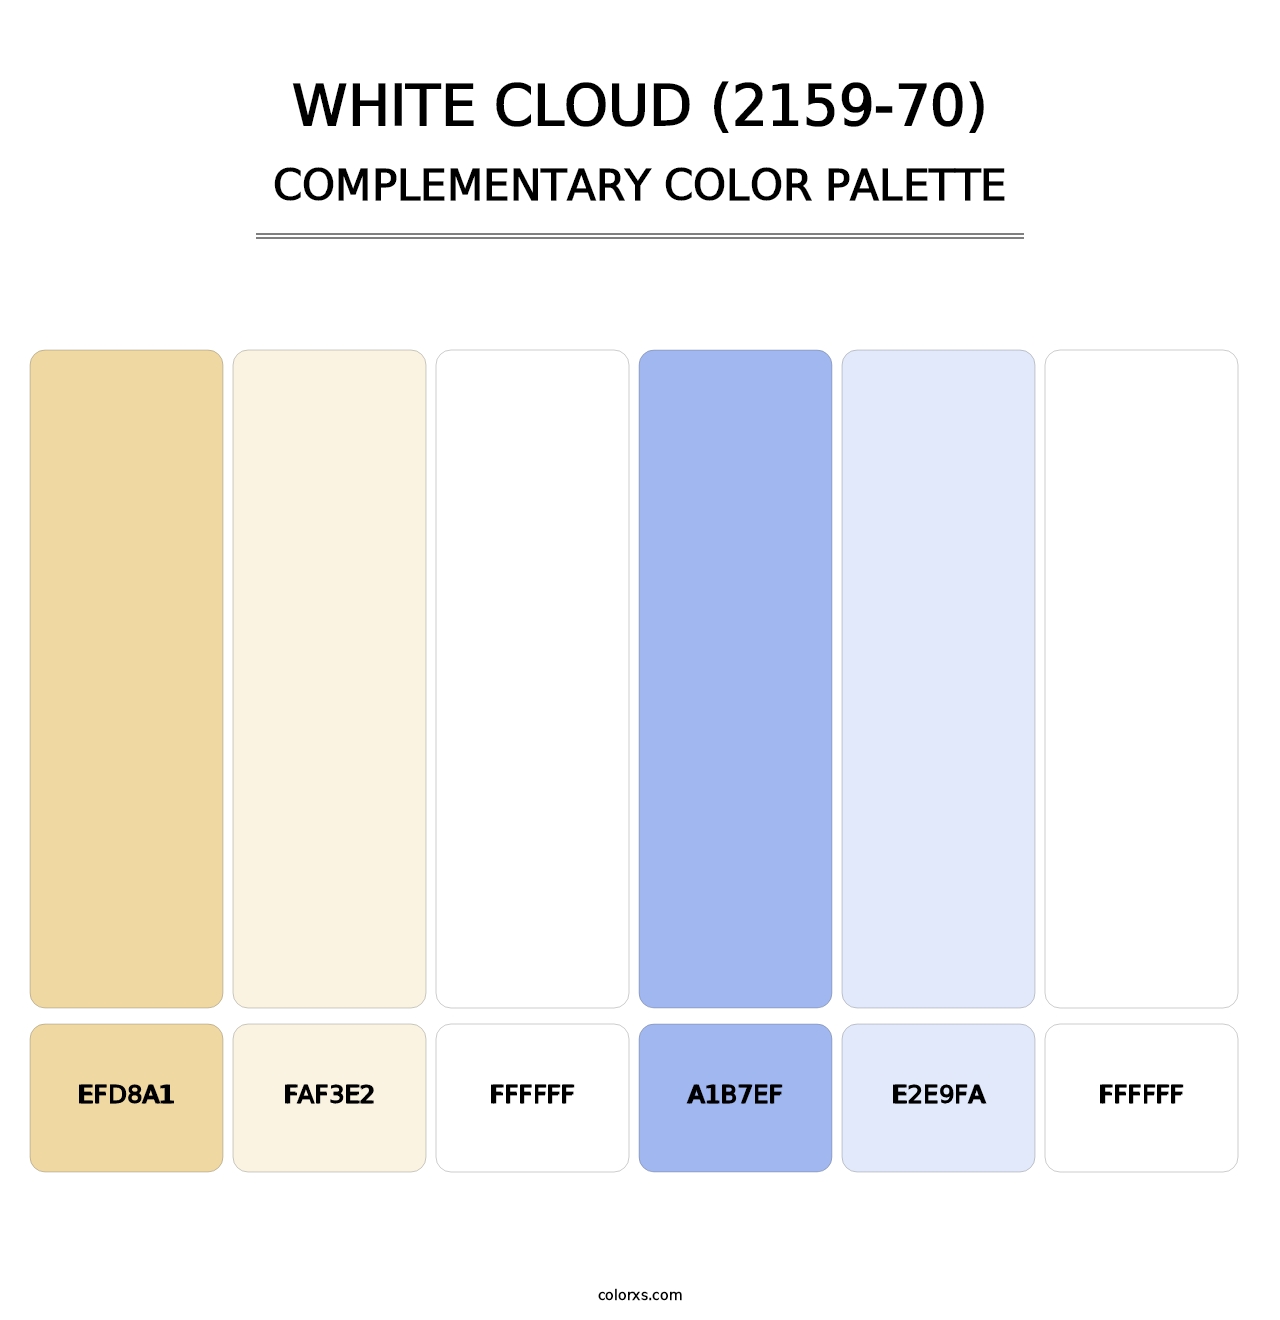 White Cloud (2159-70) - Complementary Color Palette